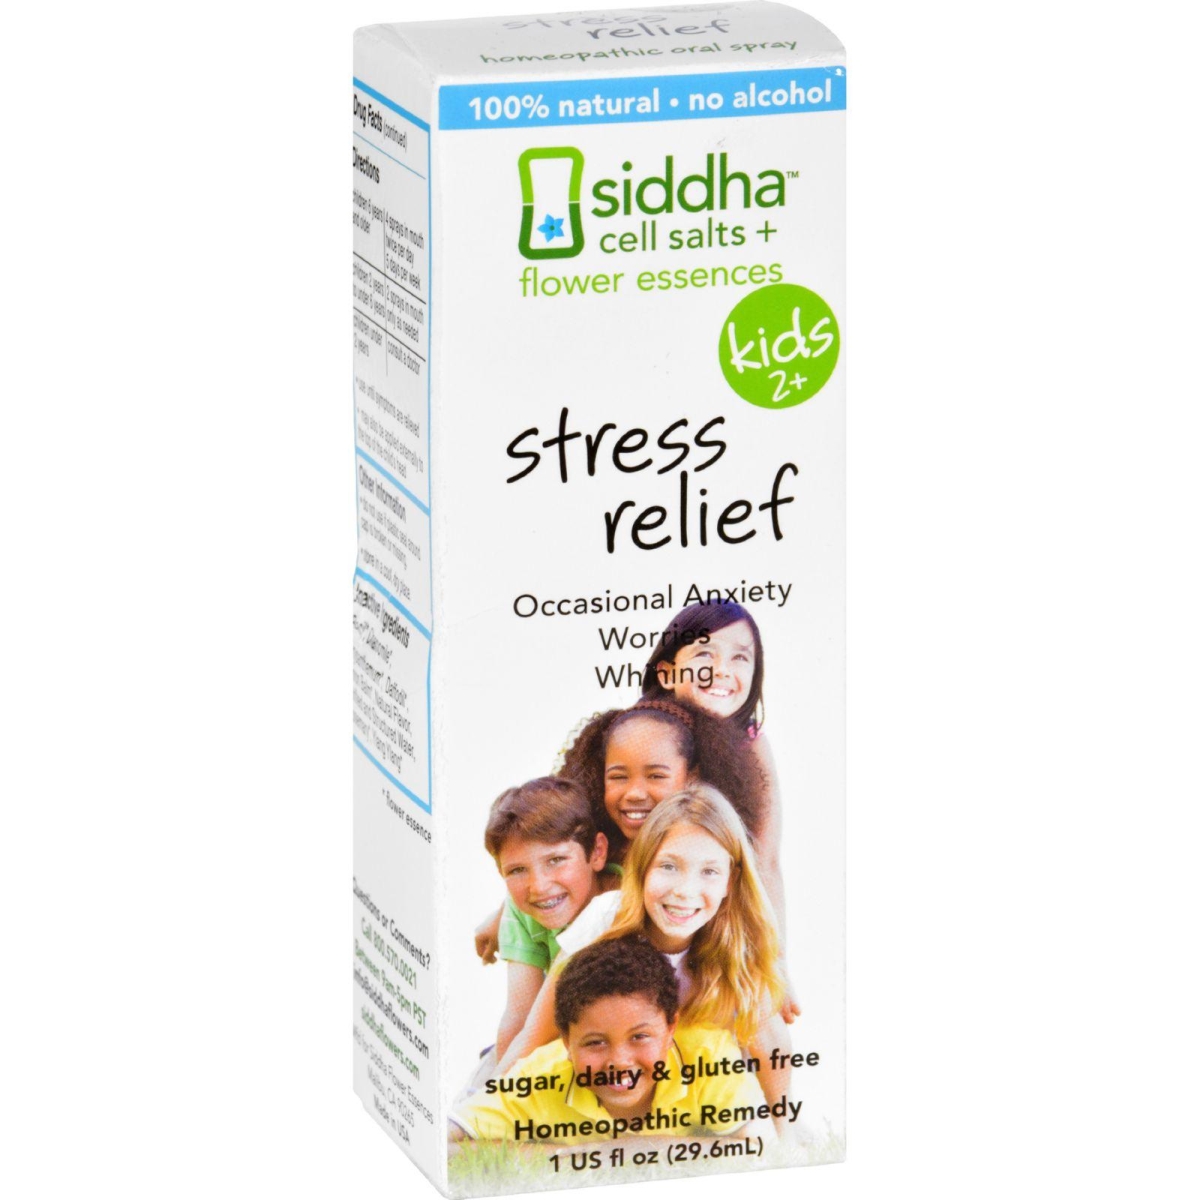 Hg1556976 1 Fl Oz Stress Relief For Kids - Age Two Plus